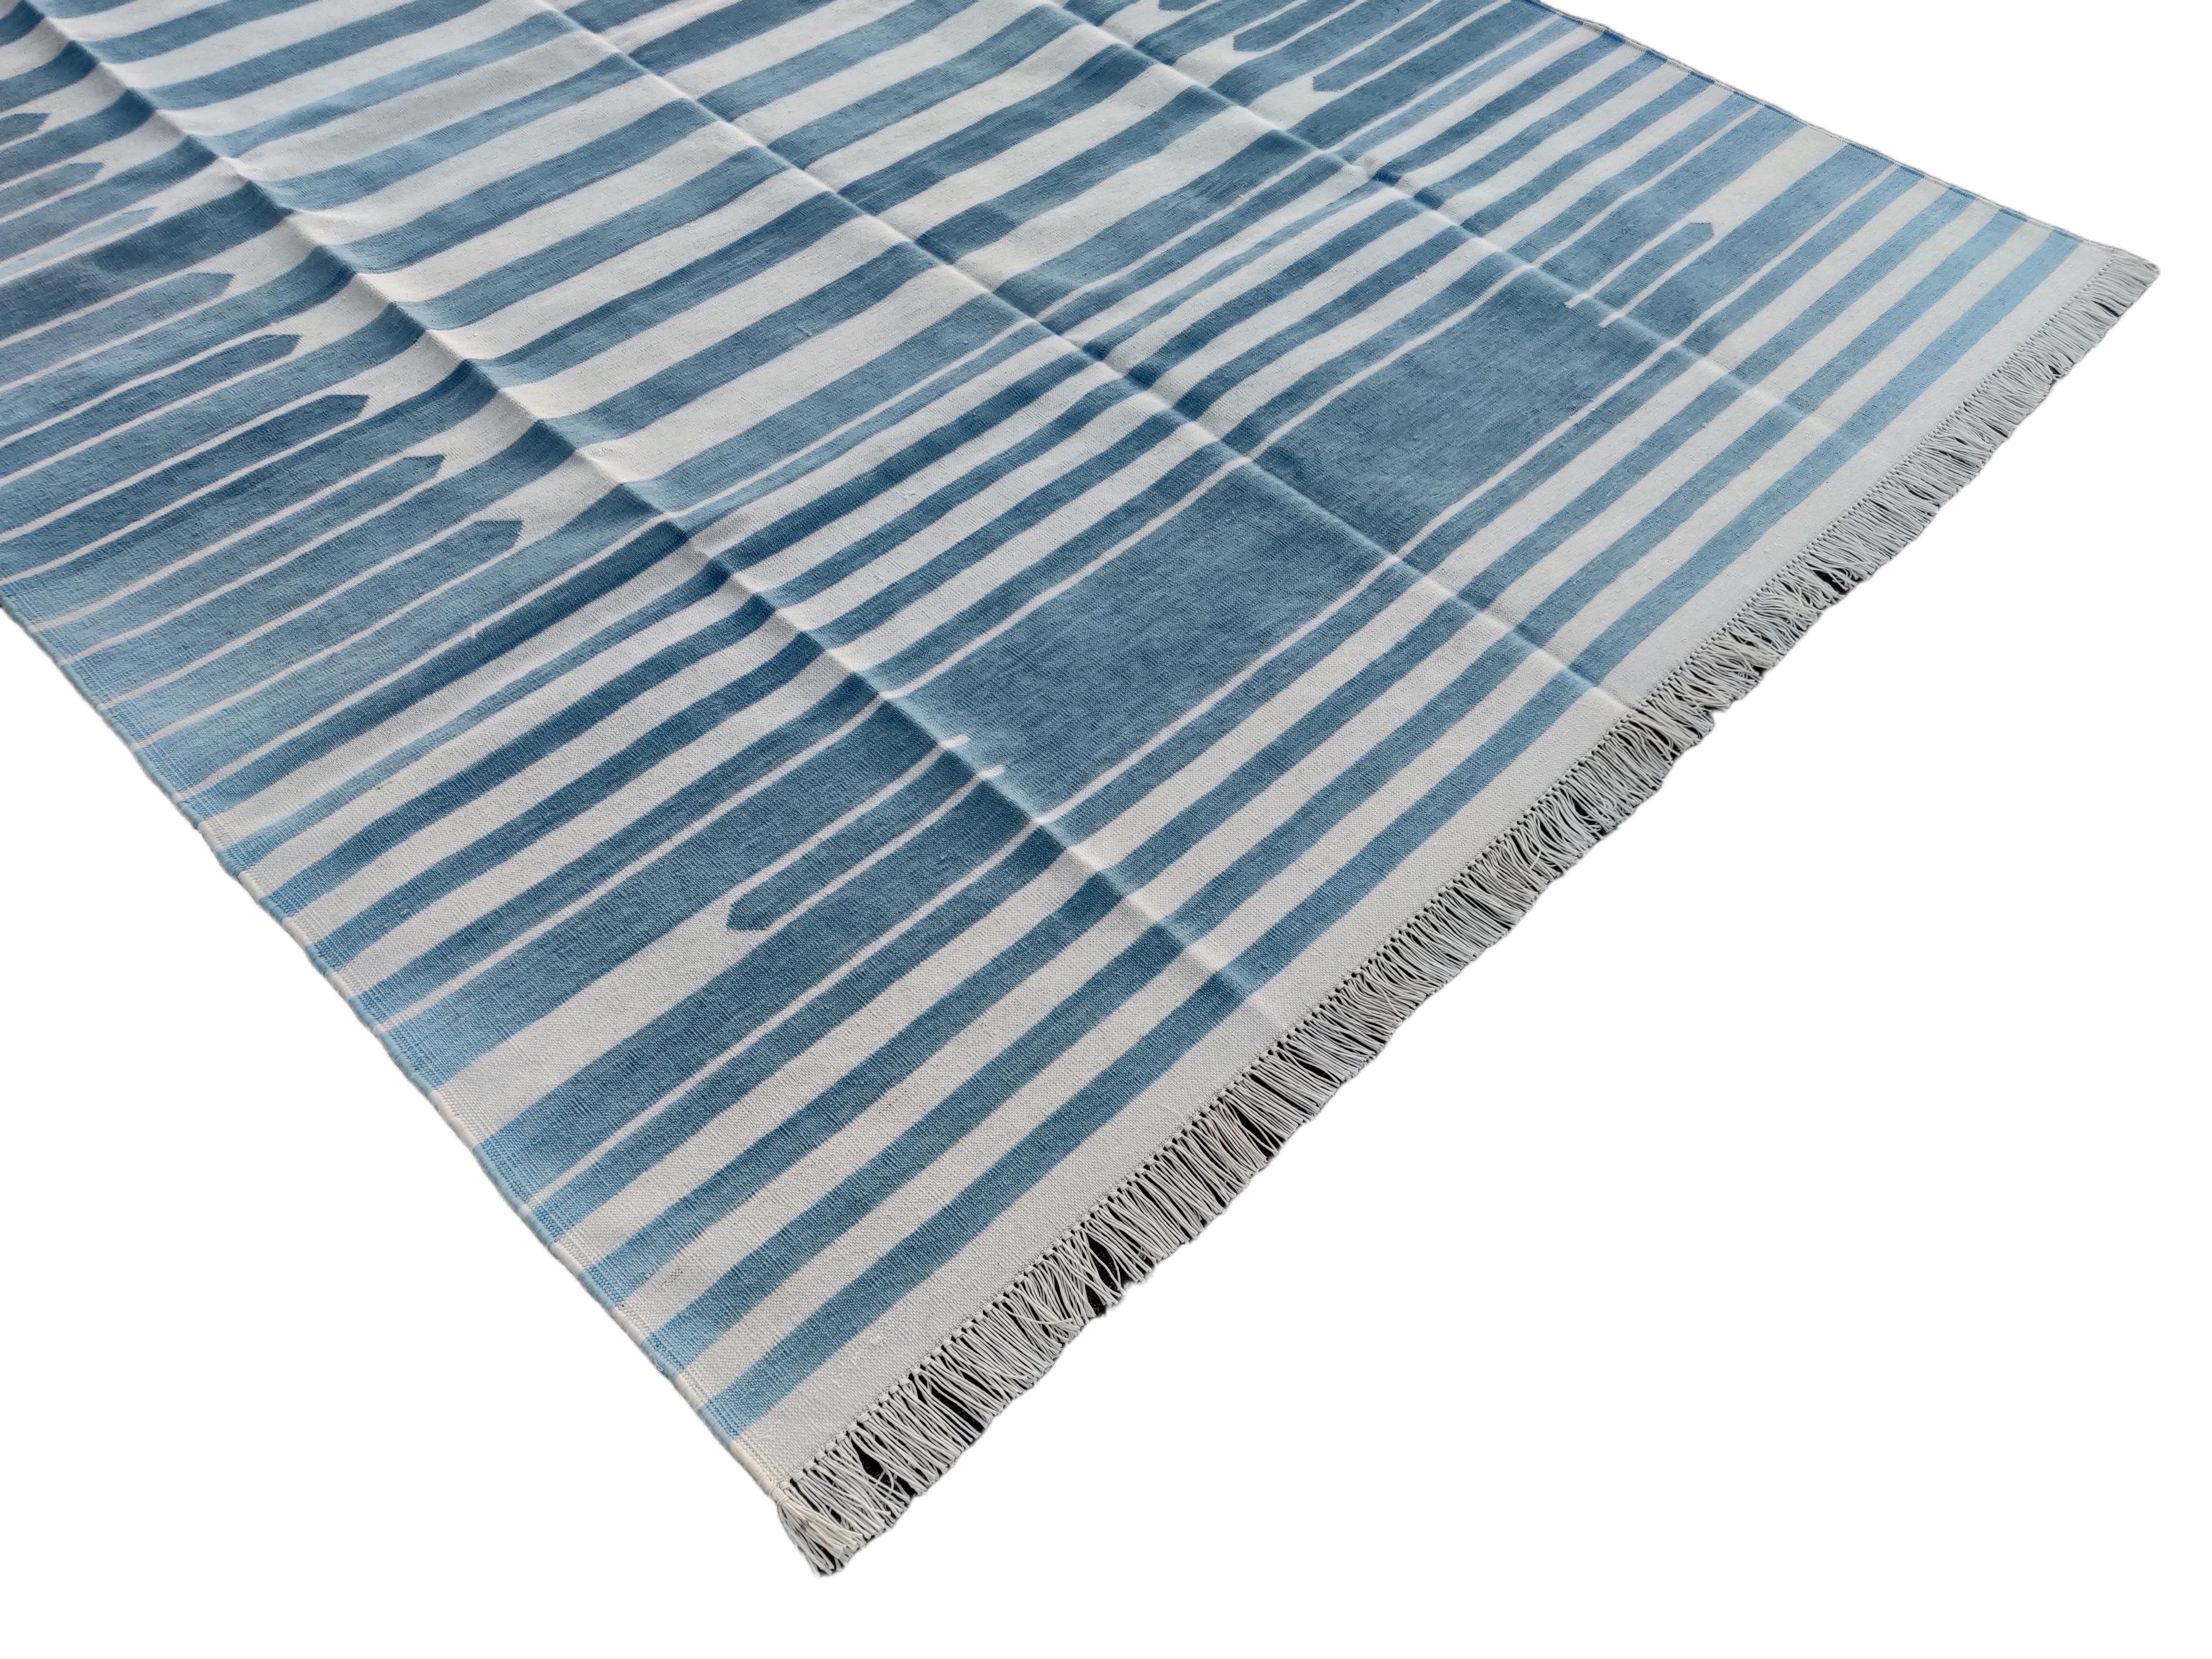 Handmade Cotton Area Flat Weave Rug, 5x8 Blue And White Striped Indian Dhurrie In New Condition For Sale In Jaipur, IN